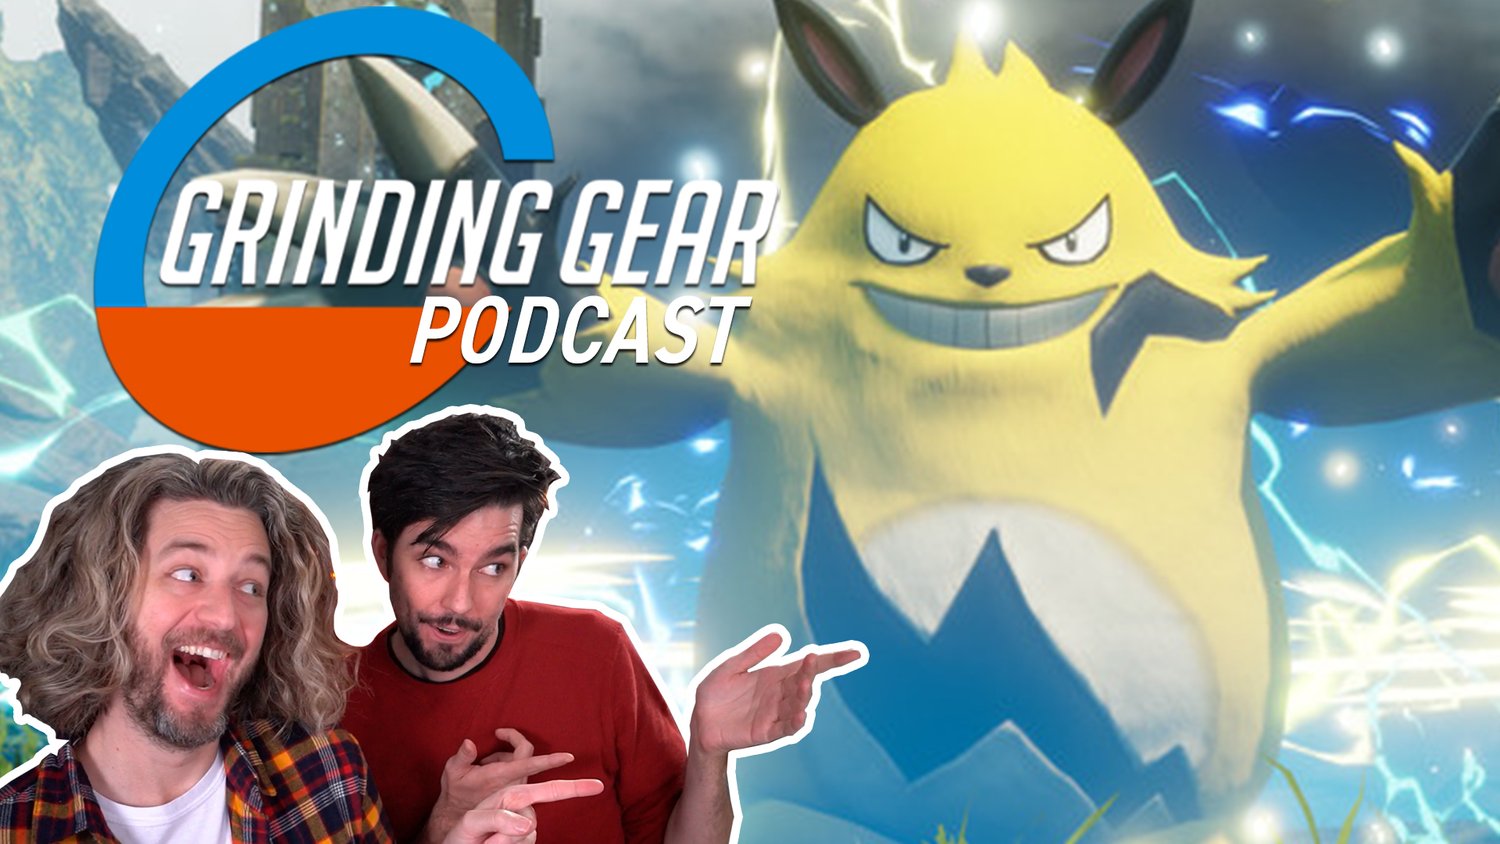 Hyper-Growth | The Grinding Gear Podcast #72